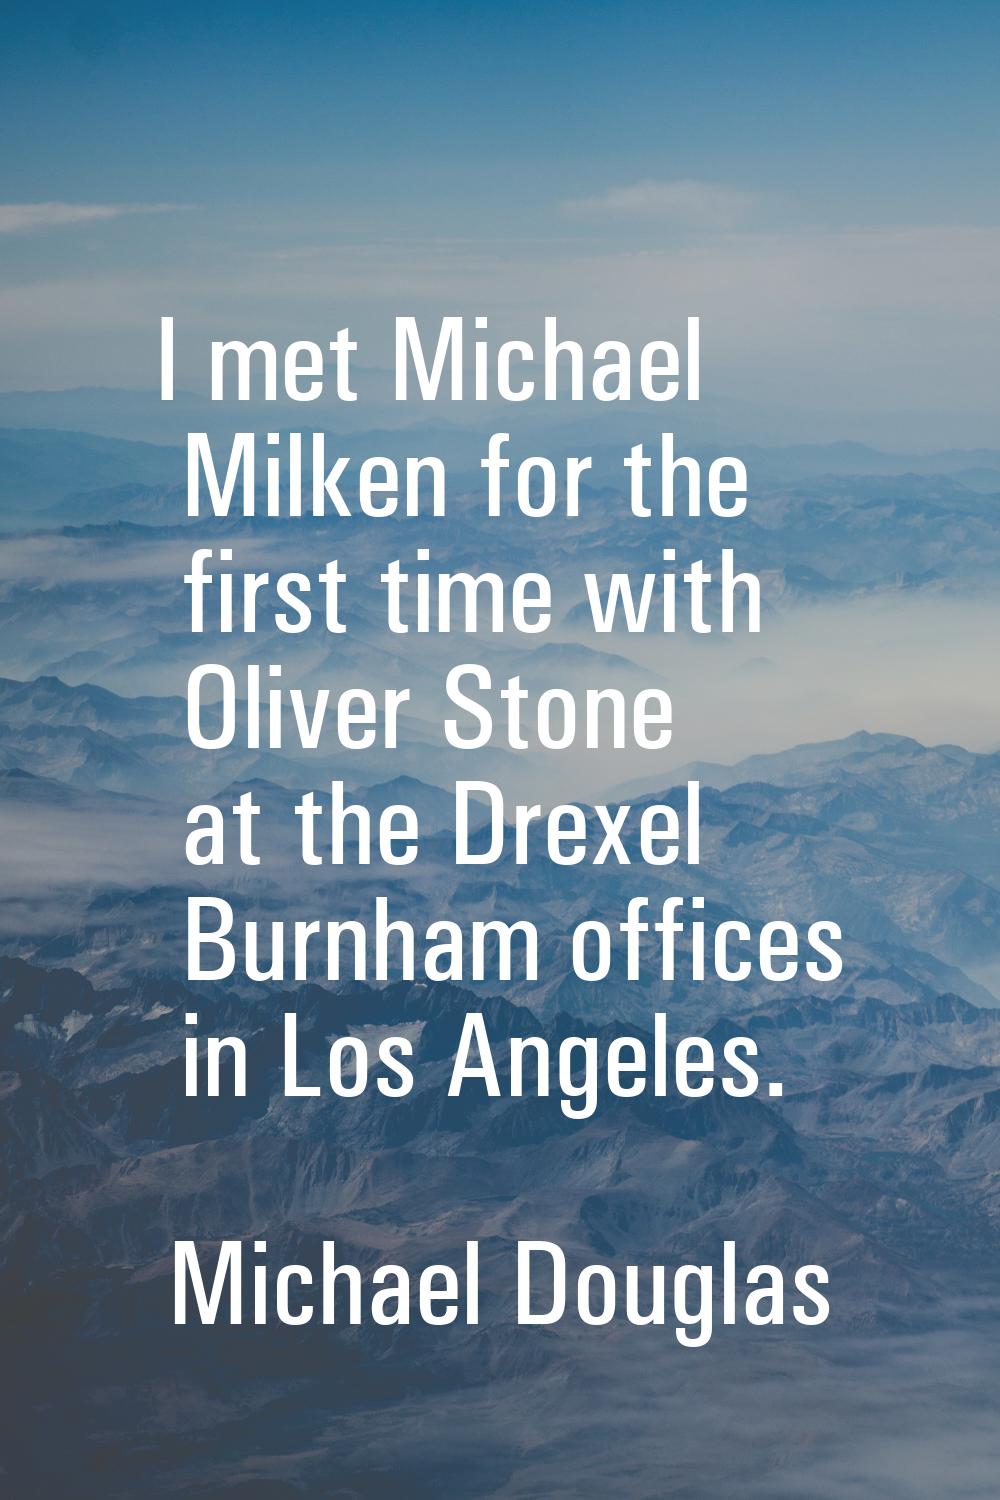 I met Michael Milken for the first time with Oliver Stone at the Drexel Burnham offices in Los Ange